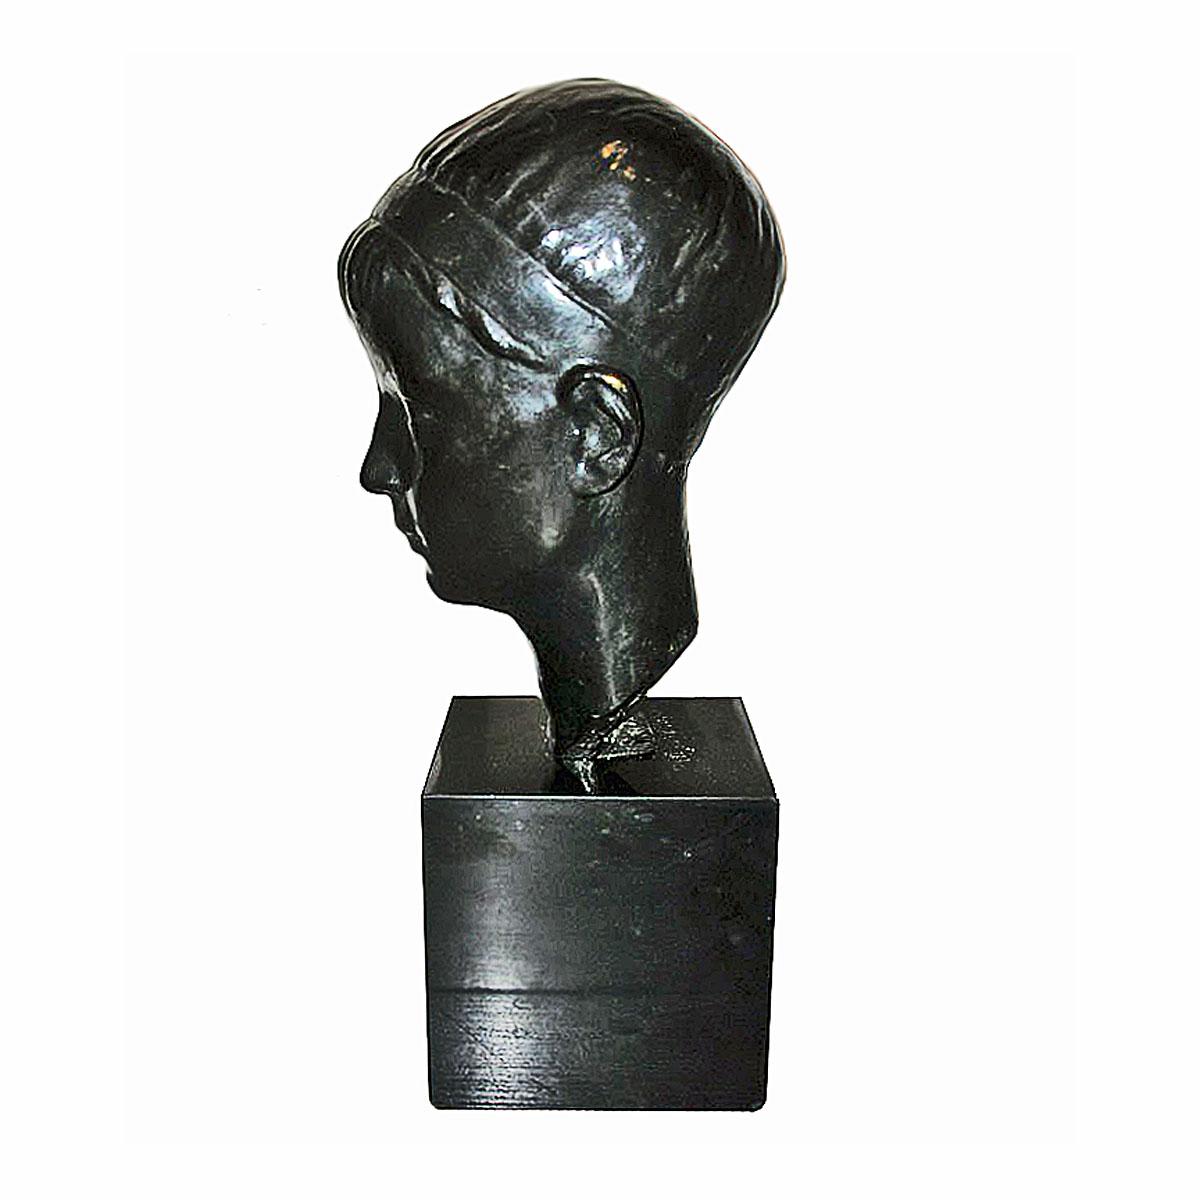 A bronze head of a youth in bronze with black patina, on a black marble pedestal, circa 1935. 

By Alexandre Wolkowyski, Russian sculptor, 1883-1961.